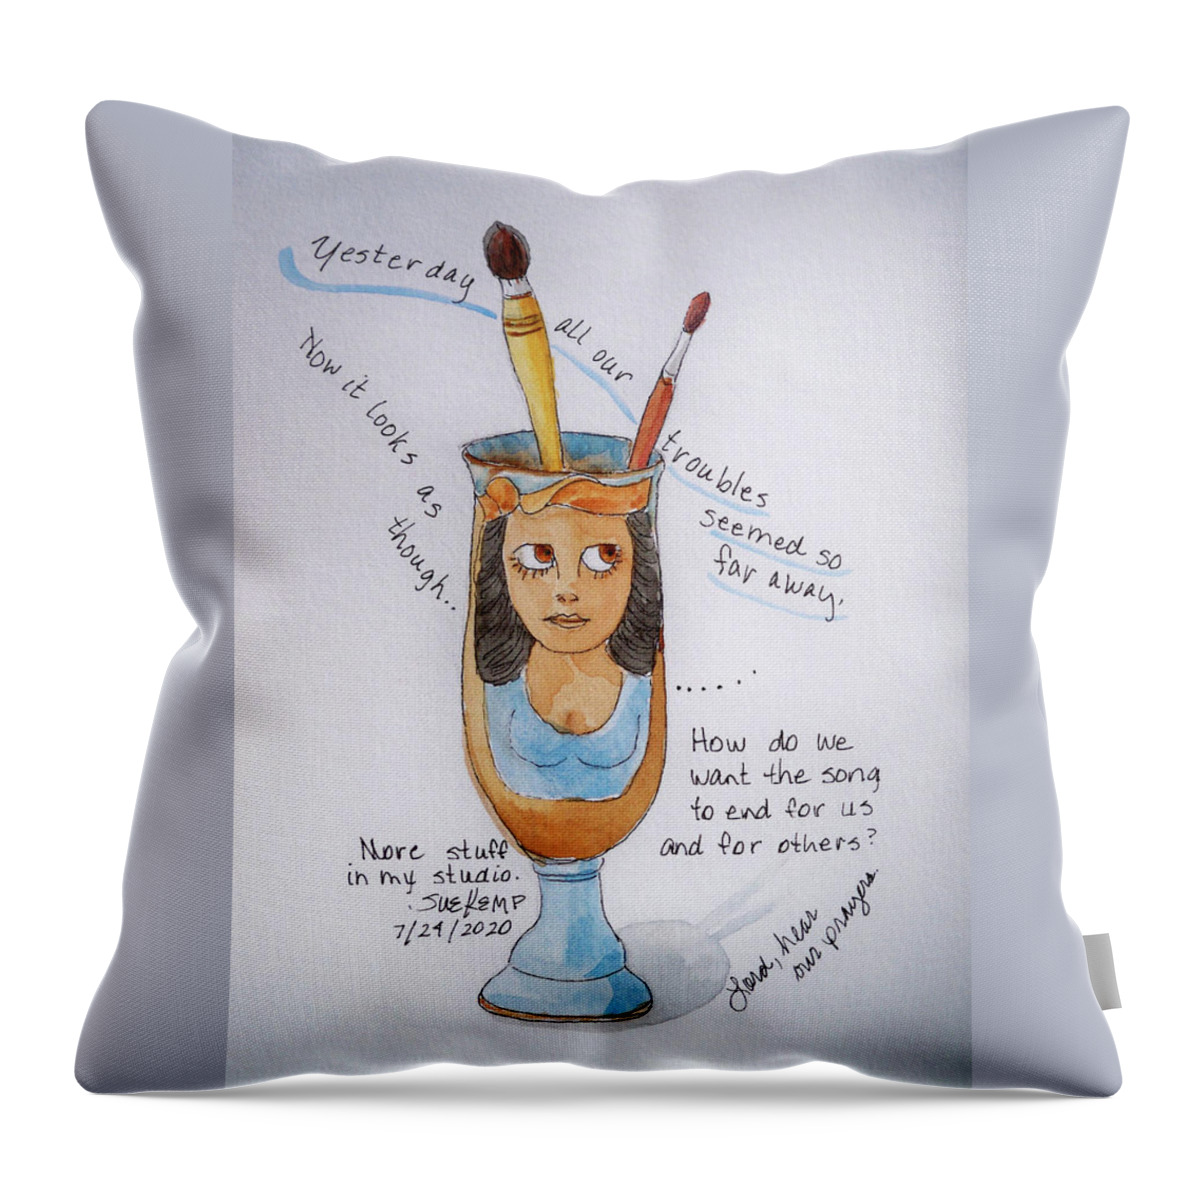 Memories Throw Pillow featuring the painting Yesterday by Sue Kemp